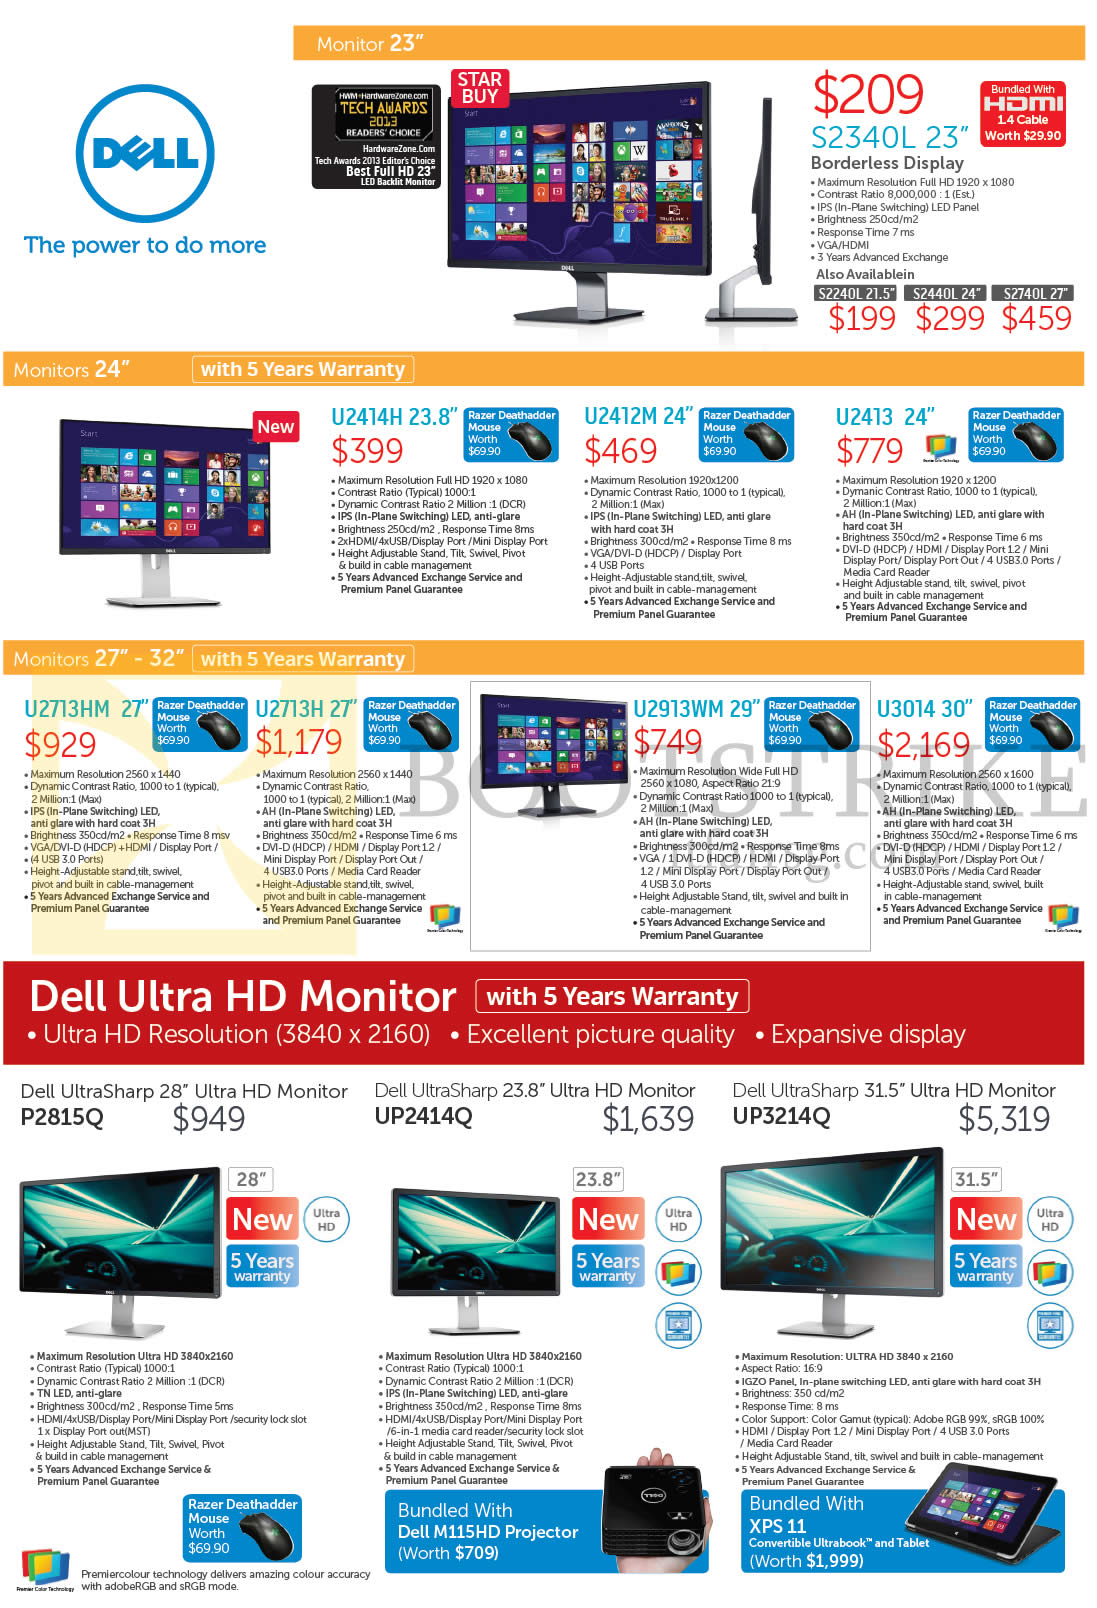 PC SHOW 2014 price list image brochure of Dell Monitors S2340L, U2414H, U2412M, U2413, U2713HM, U2713H, U2913WM, U3014, P2815Q, UP2414Q, UP3214Q